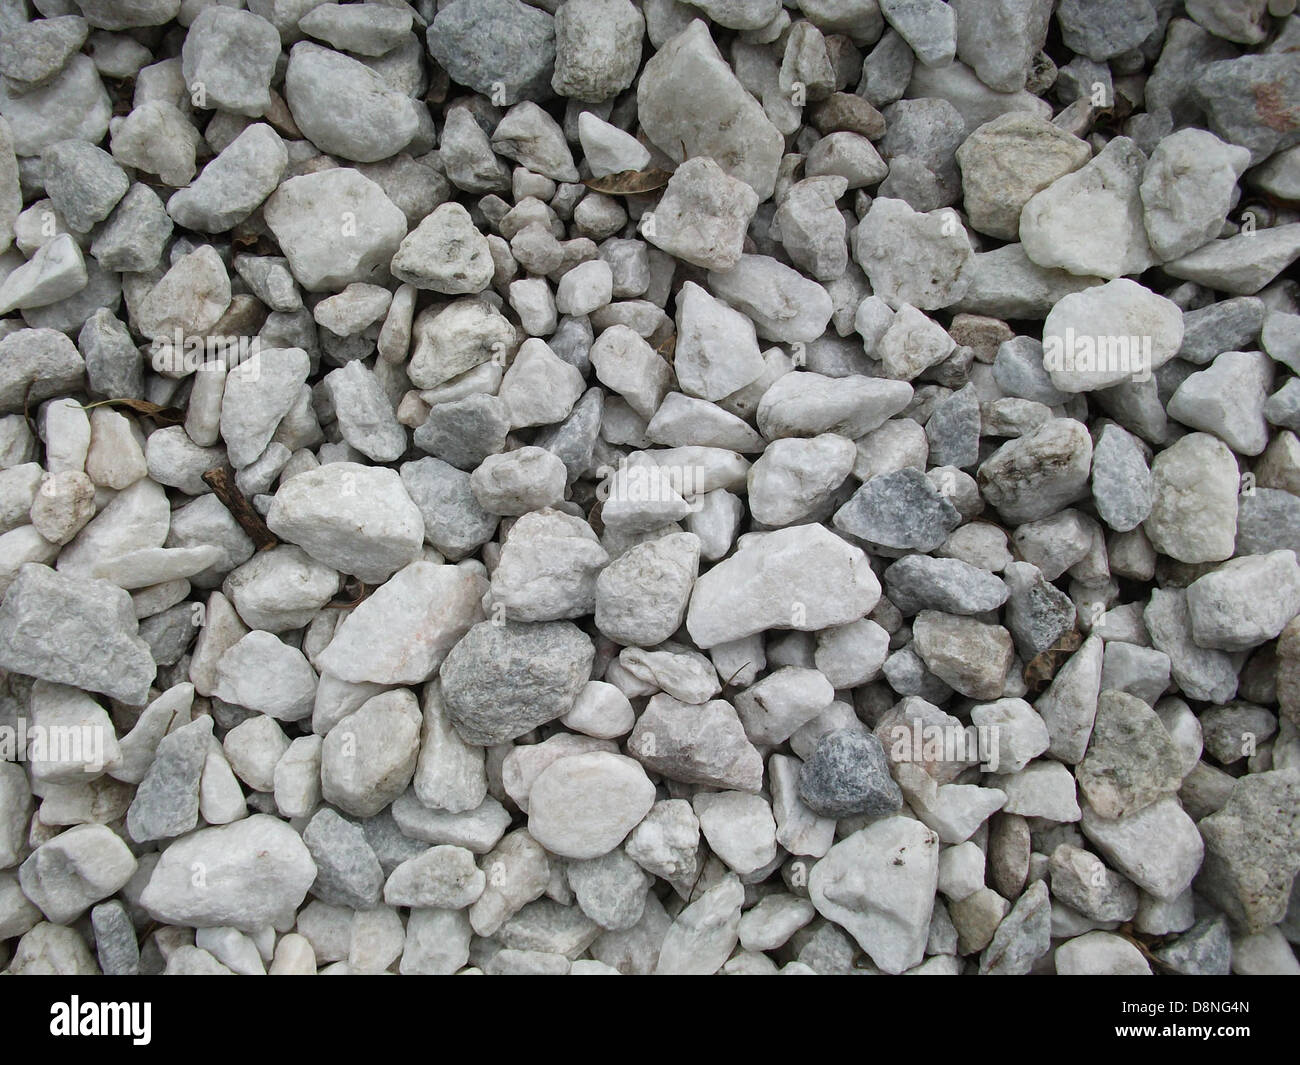 White and gray gravel of various shapes and sizes. Stock Photo